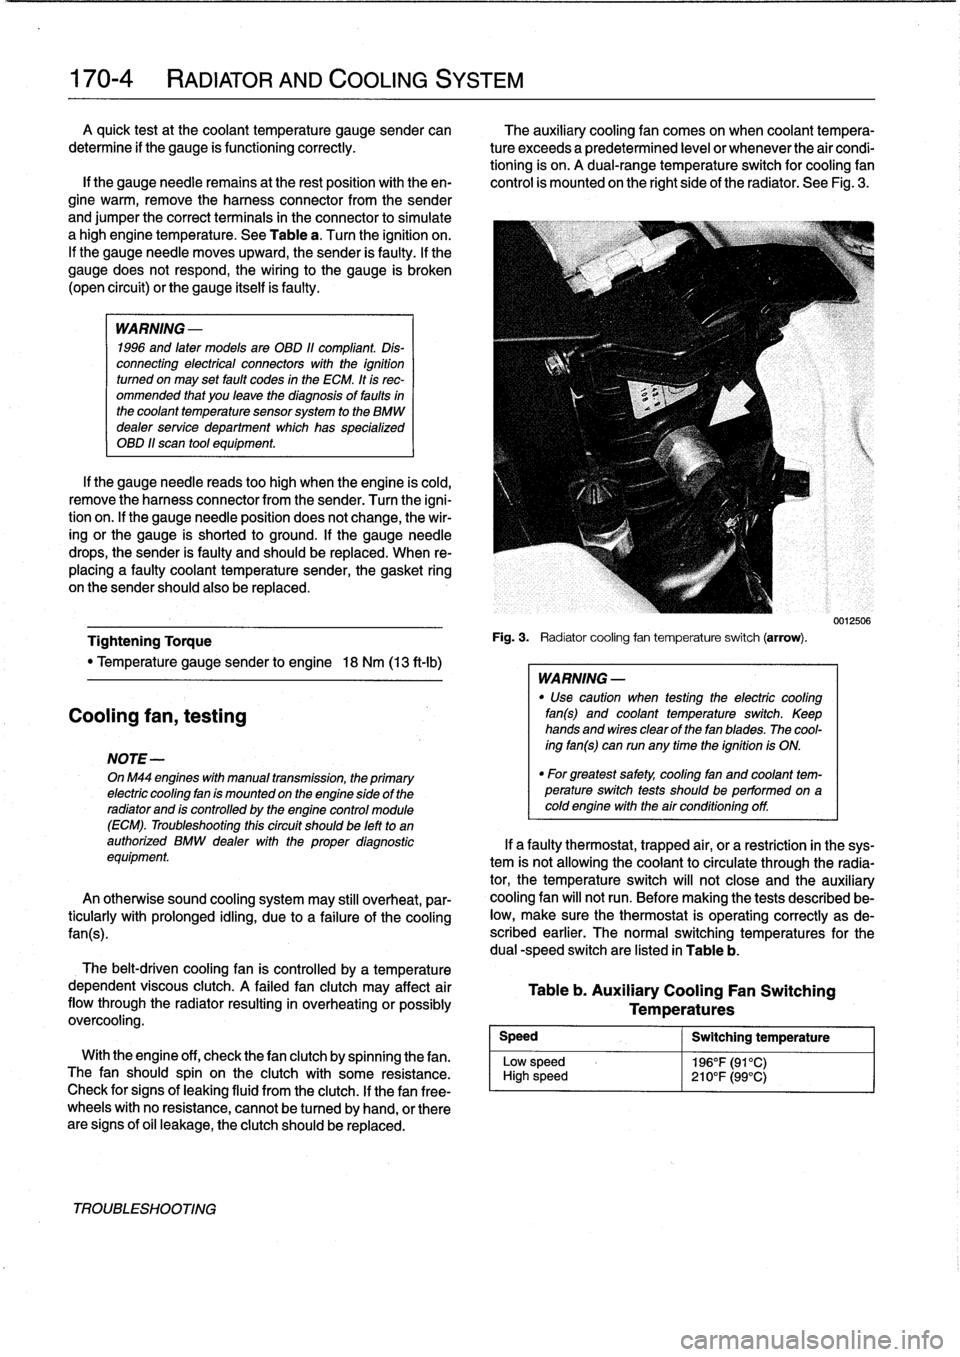 BMW 325i 1997 E36 Service Manual 
170-
4

	

RADIATOR
AND
COOLING
SYSTEM
A
quick
testat
the
coolant
temperature
gauge
sender
can

	

The
auxiliary
cooling
fan
comes
on
when
coolant
tempera

determine
if
the
gauge
is
functioning
corre